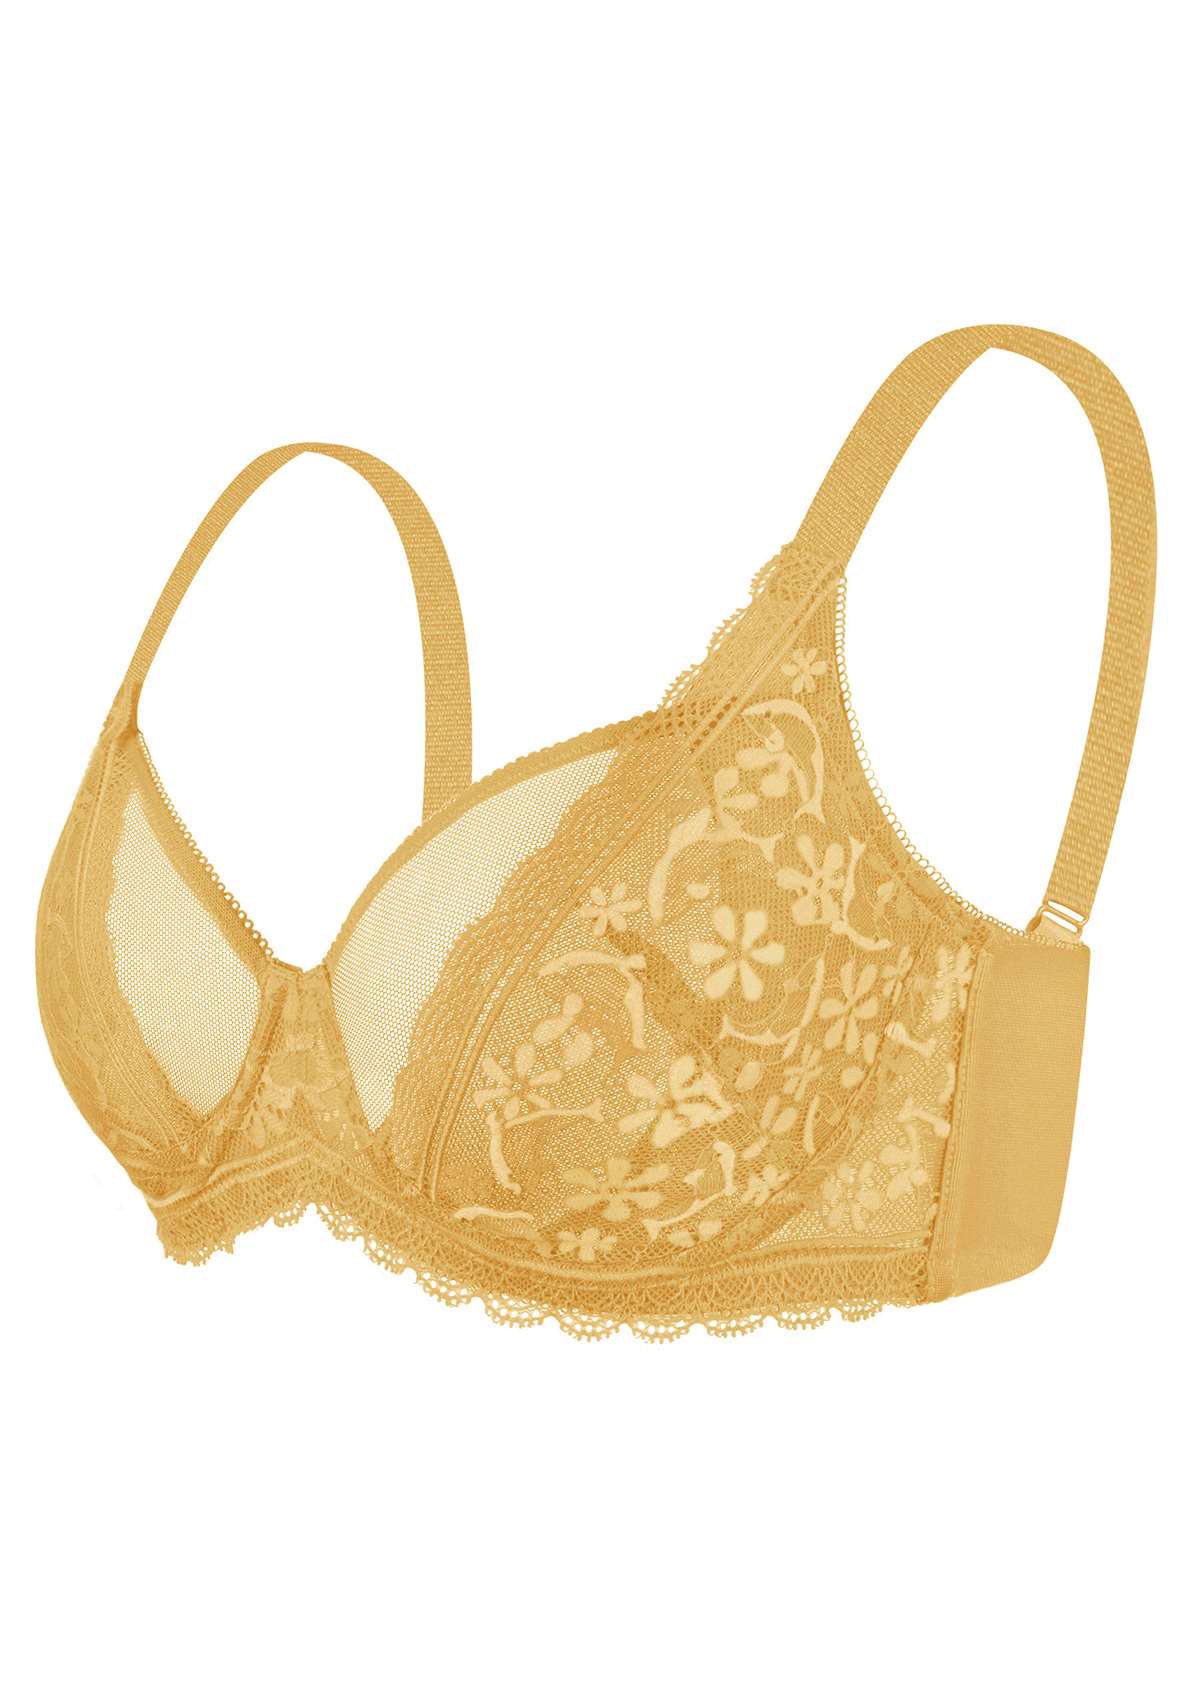 HSIA Anemone Lace Unlined Bra: Supportive, Lightweight Bra - Ginger / 36 / DD/E